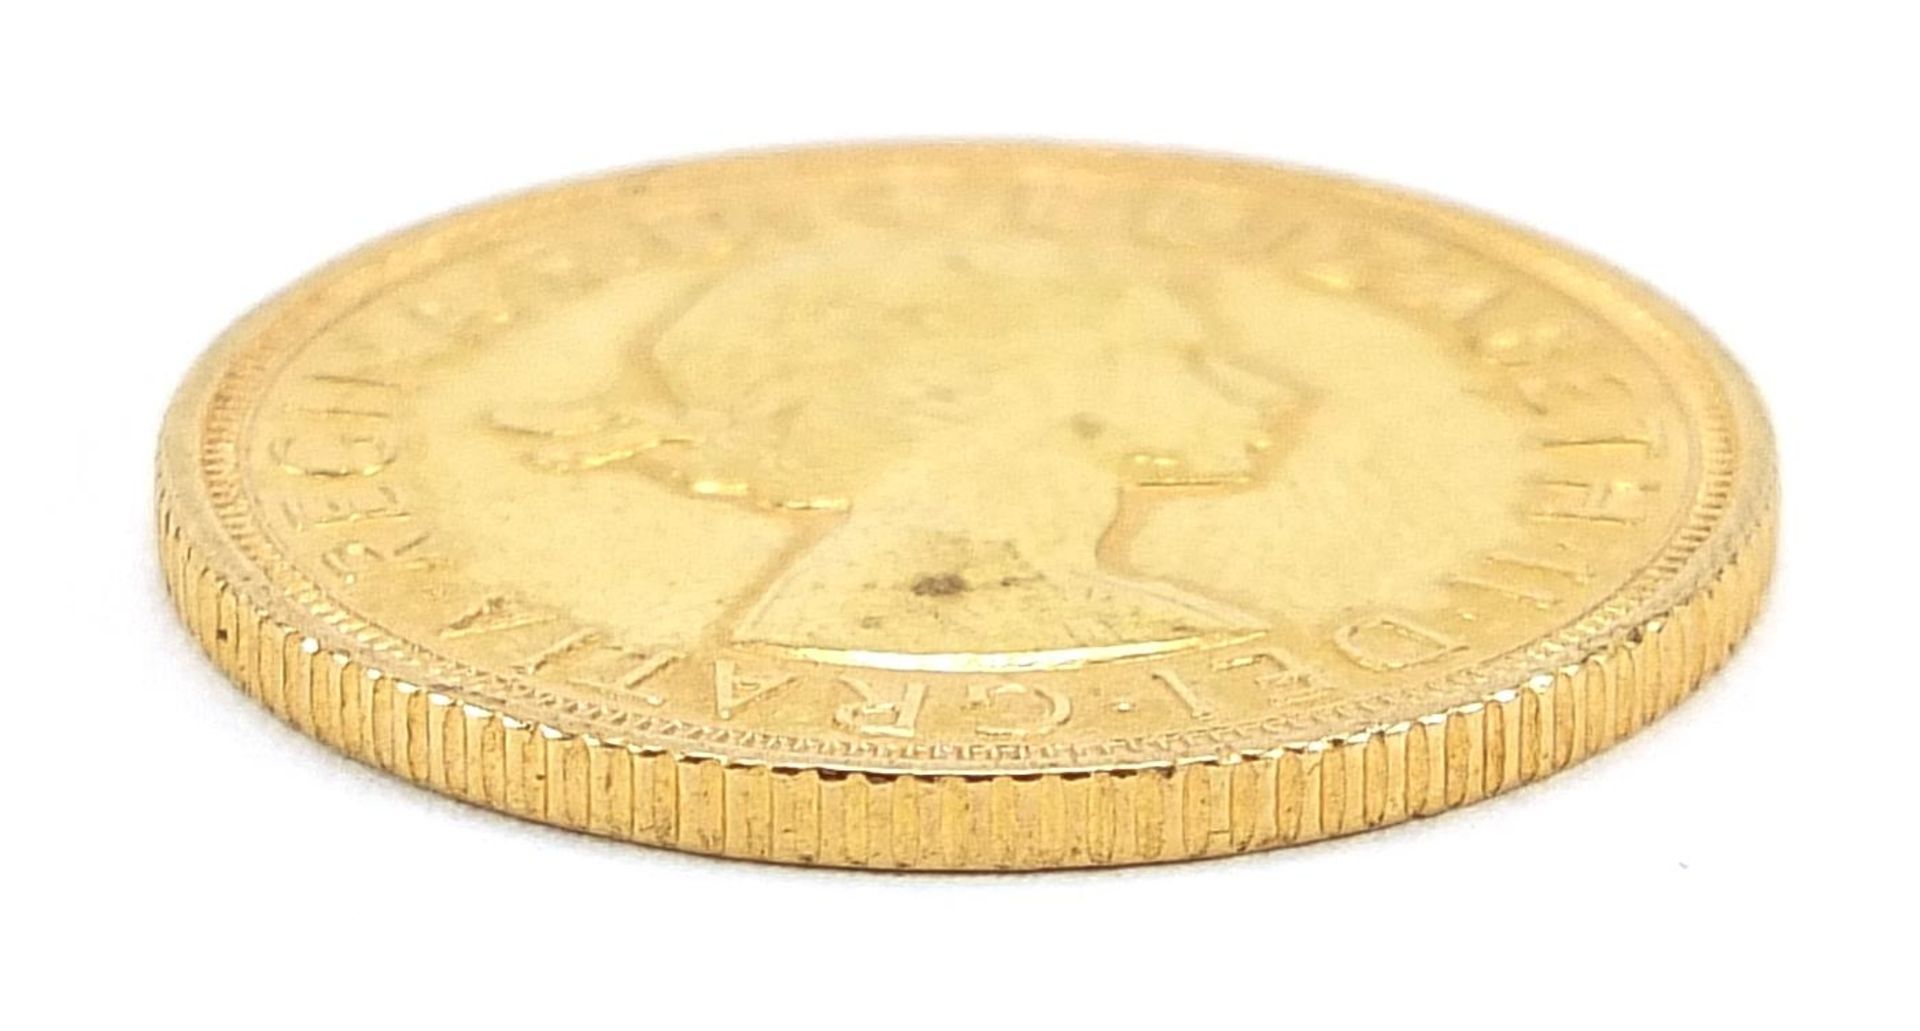 Elizabeth II 1962 gold sovereign - this lot is sold without buyer's premium - Image 3 of 3